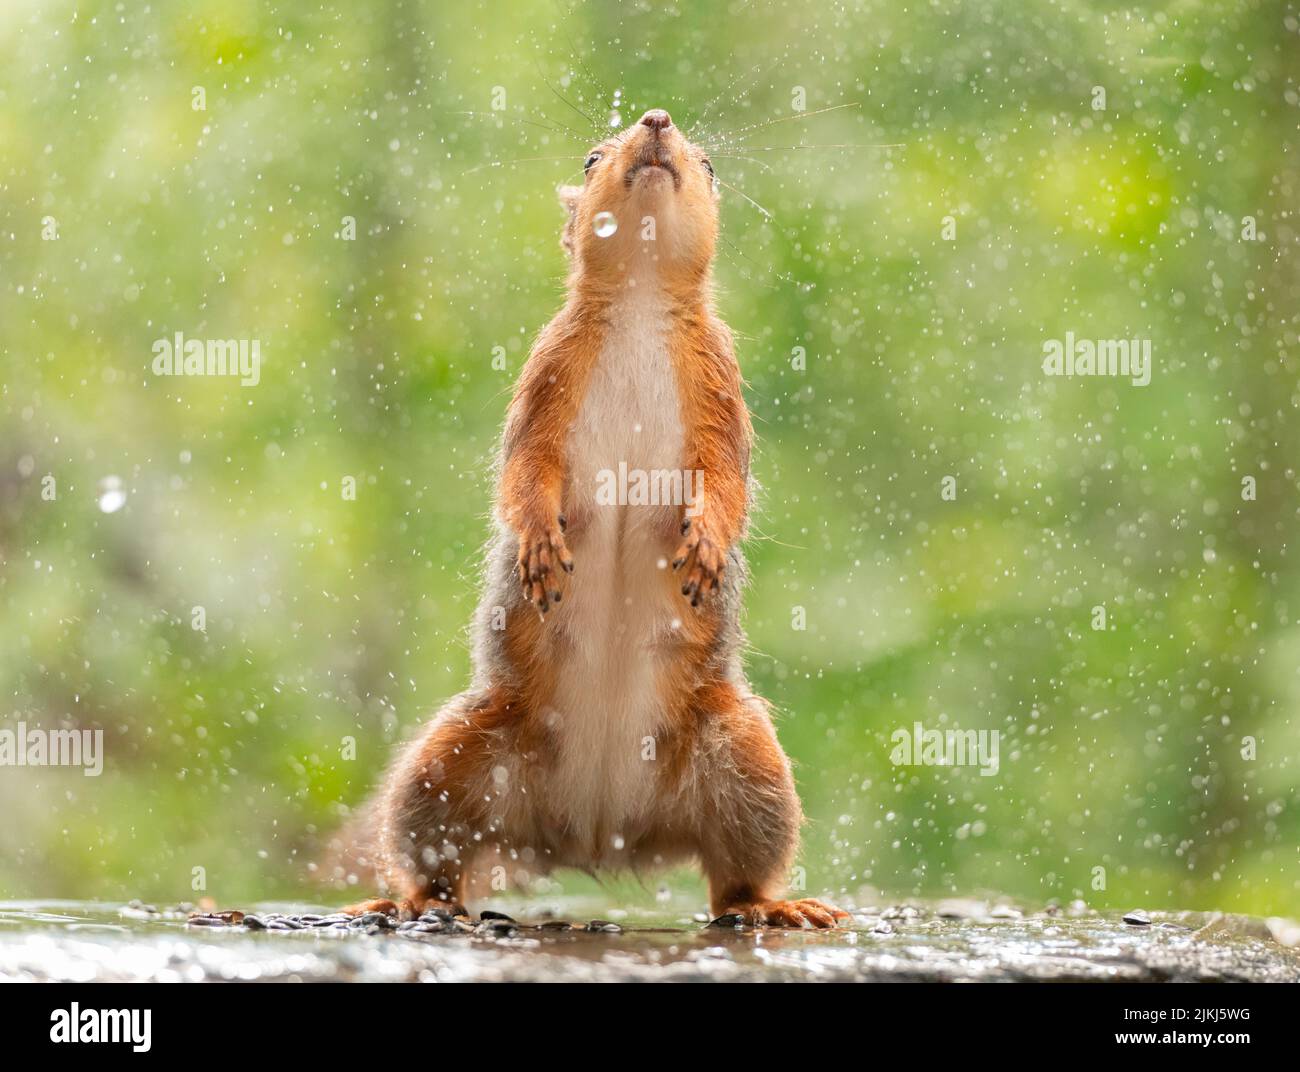 Red Squirrel stand in rain looking up Stock Photo